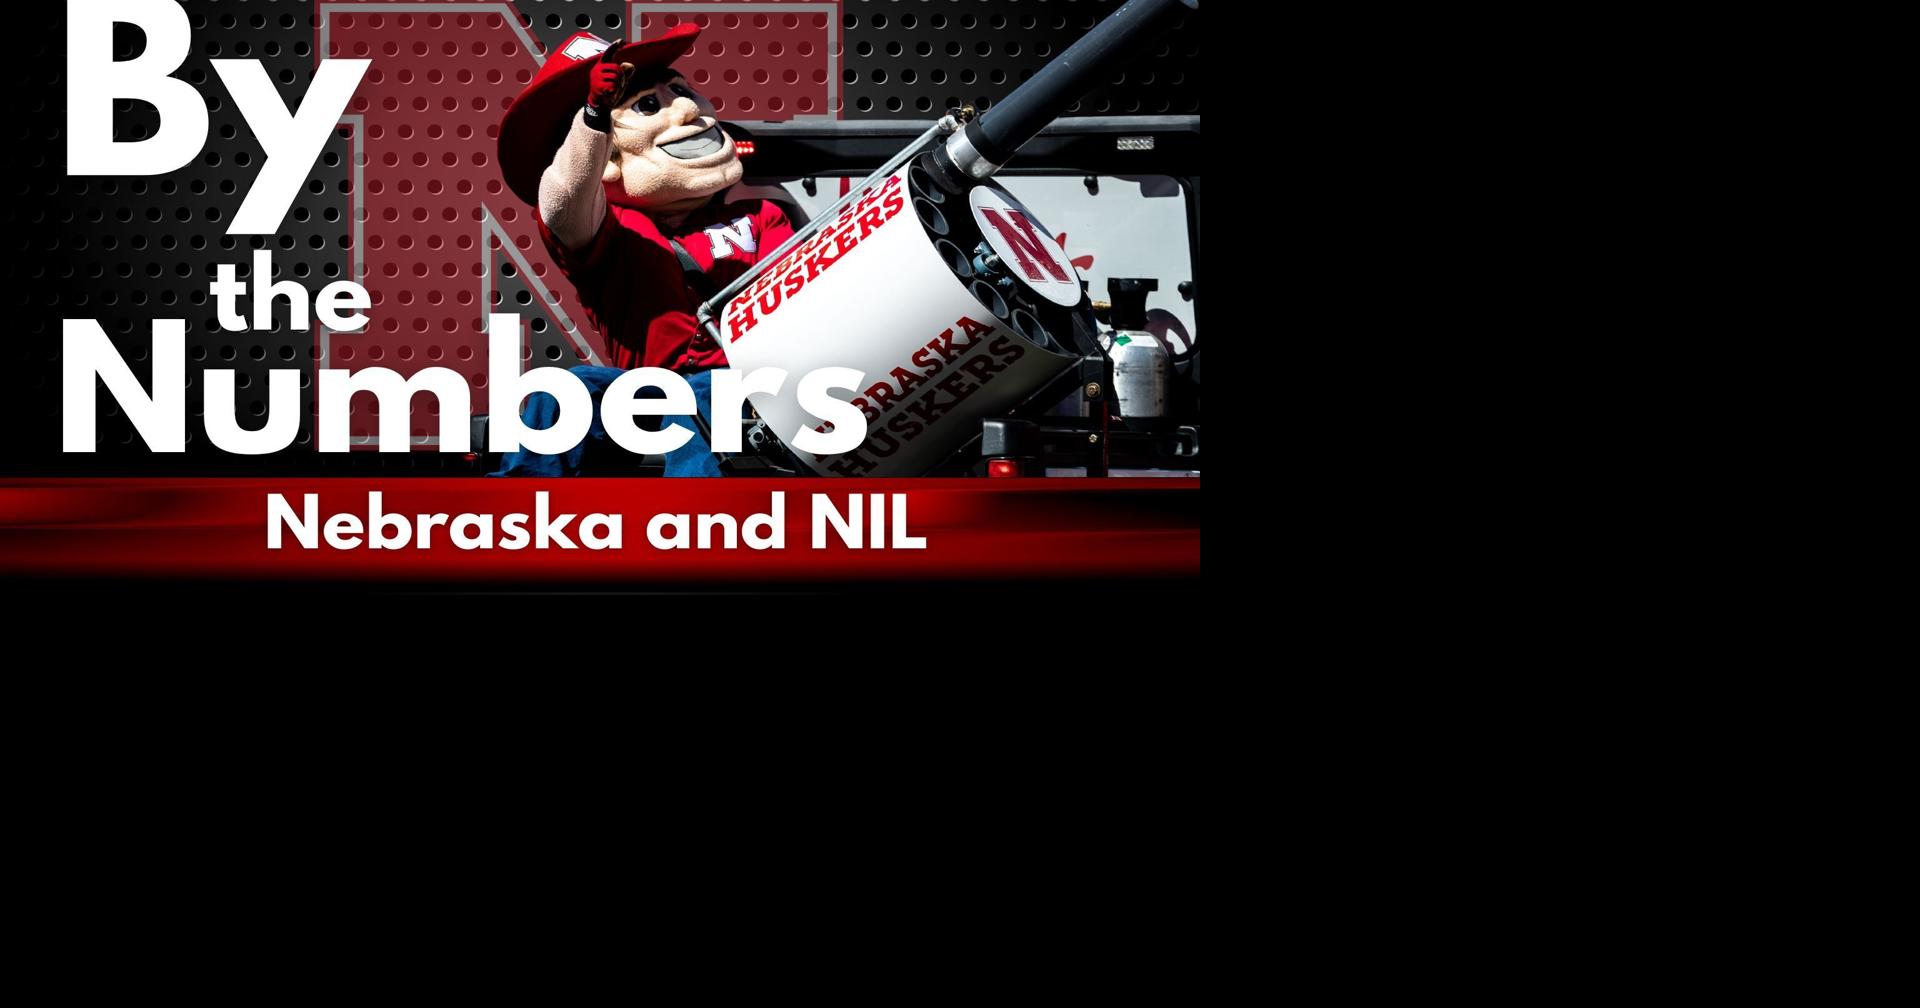 By the numbers: Nebraska and NIL